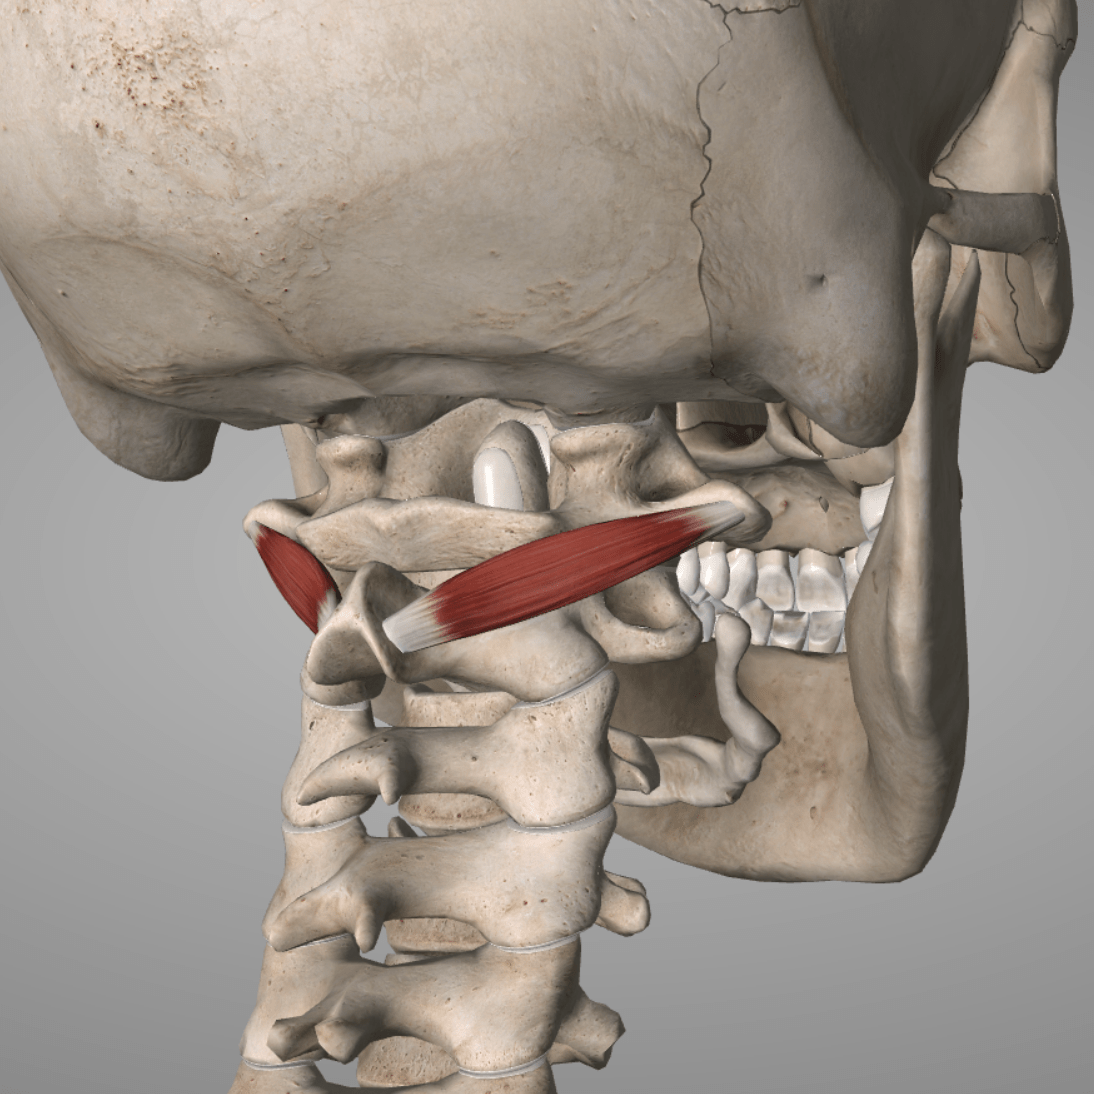 3D rendering of a human skull with cervical spine and one red muscle highlighted.